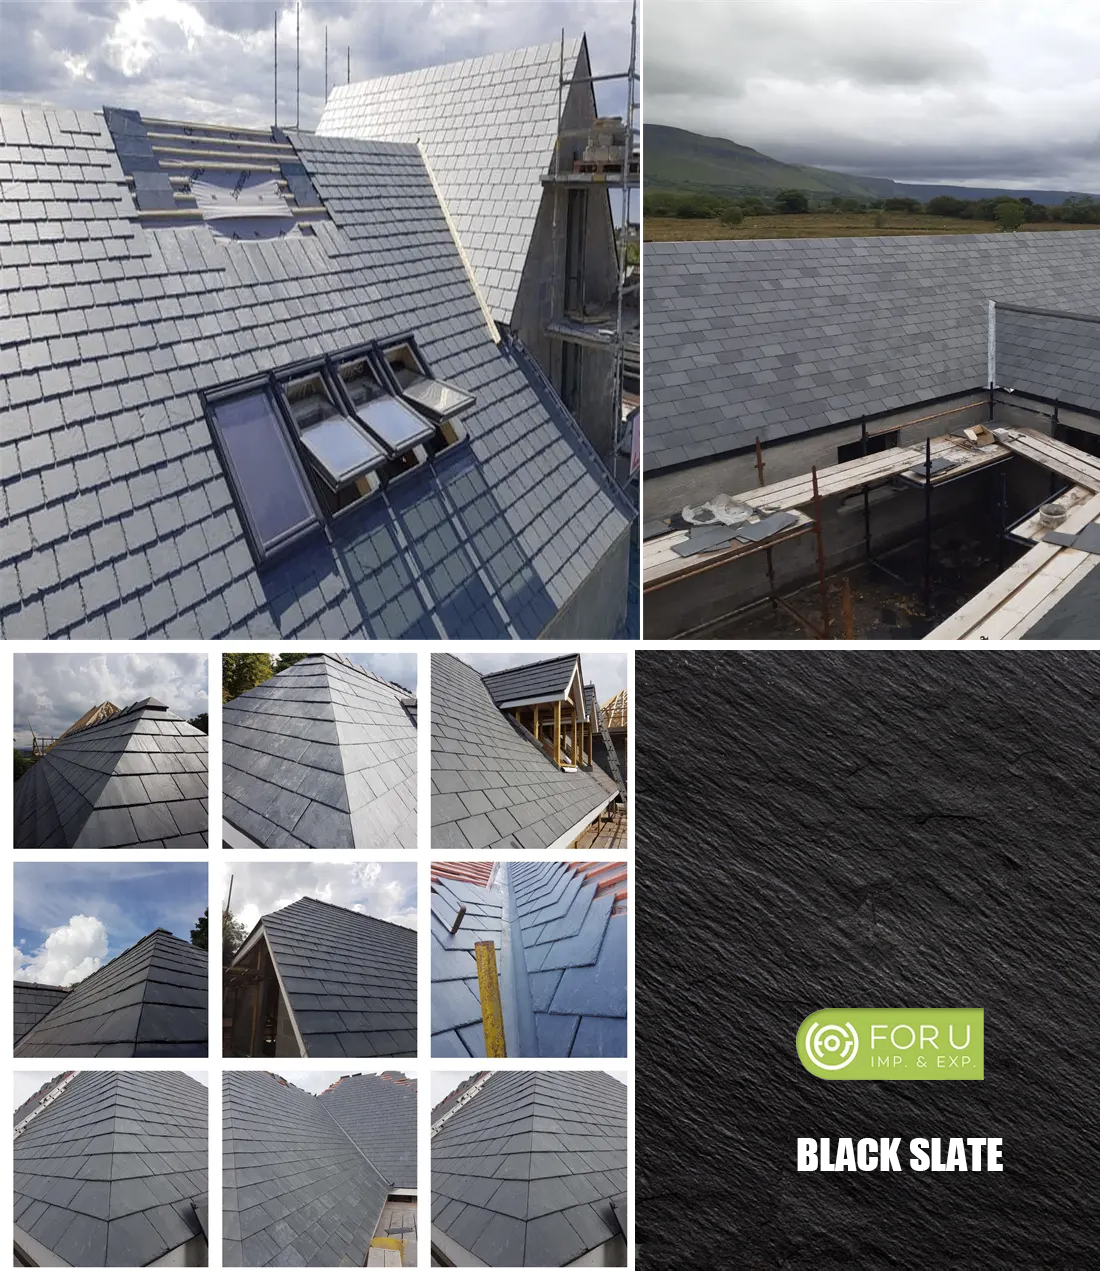 Black Slate Roofing Tiles Projects FOR U STONE